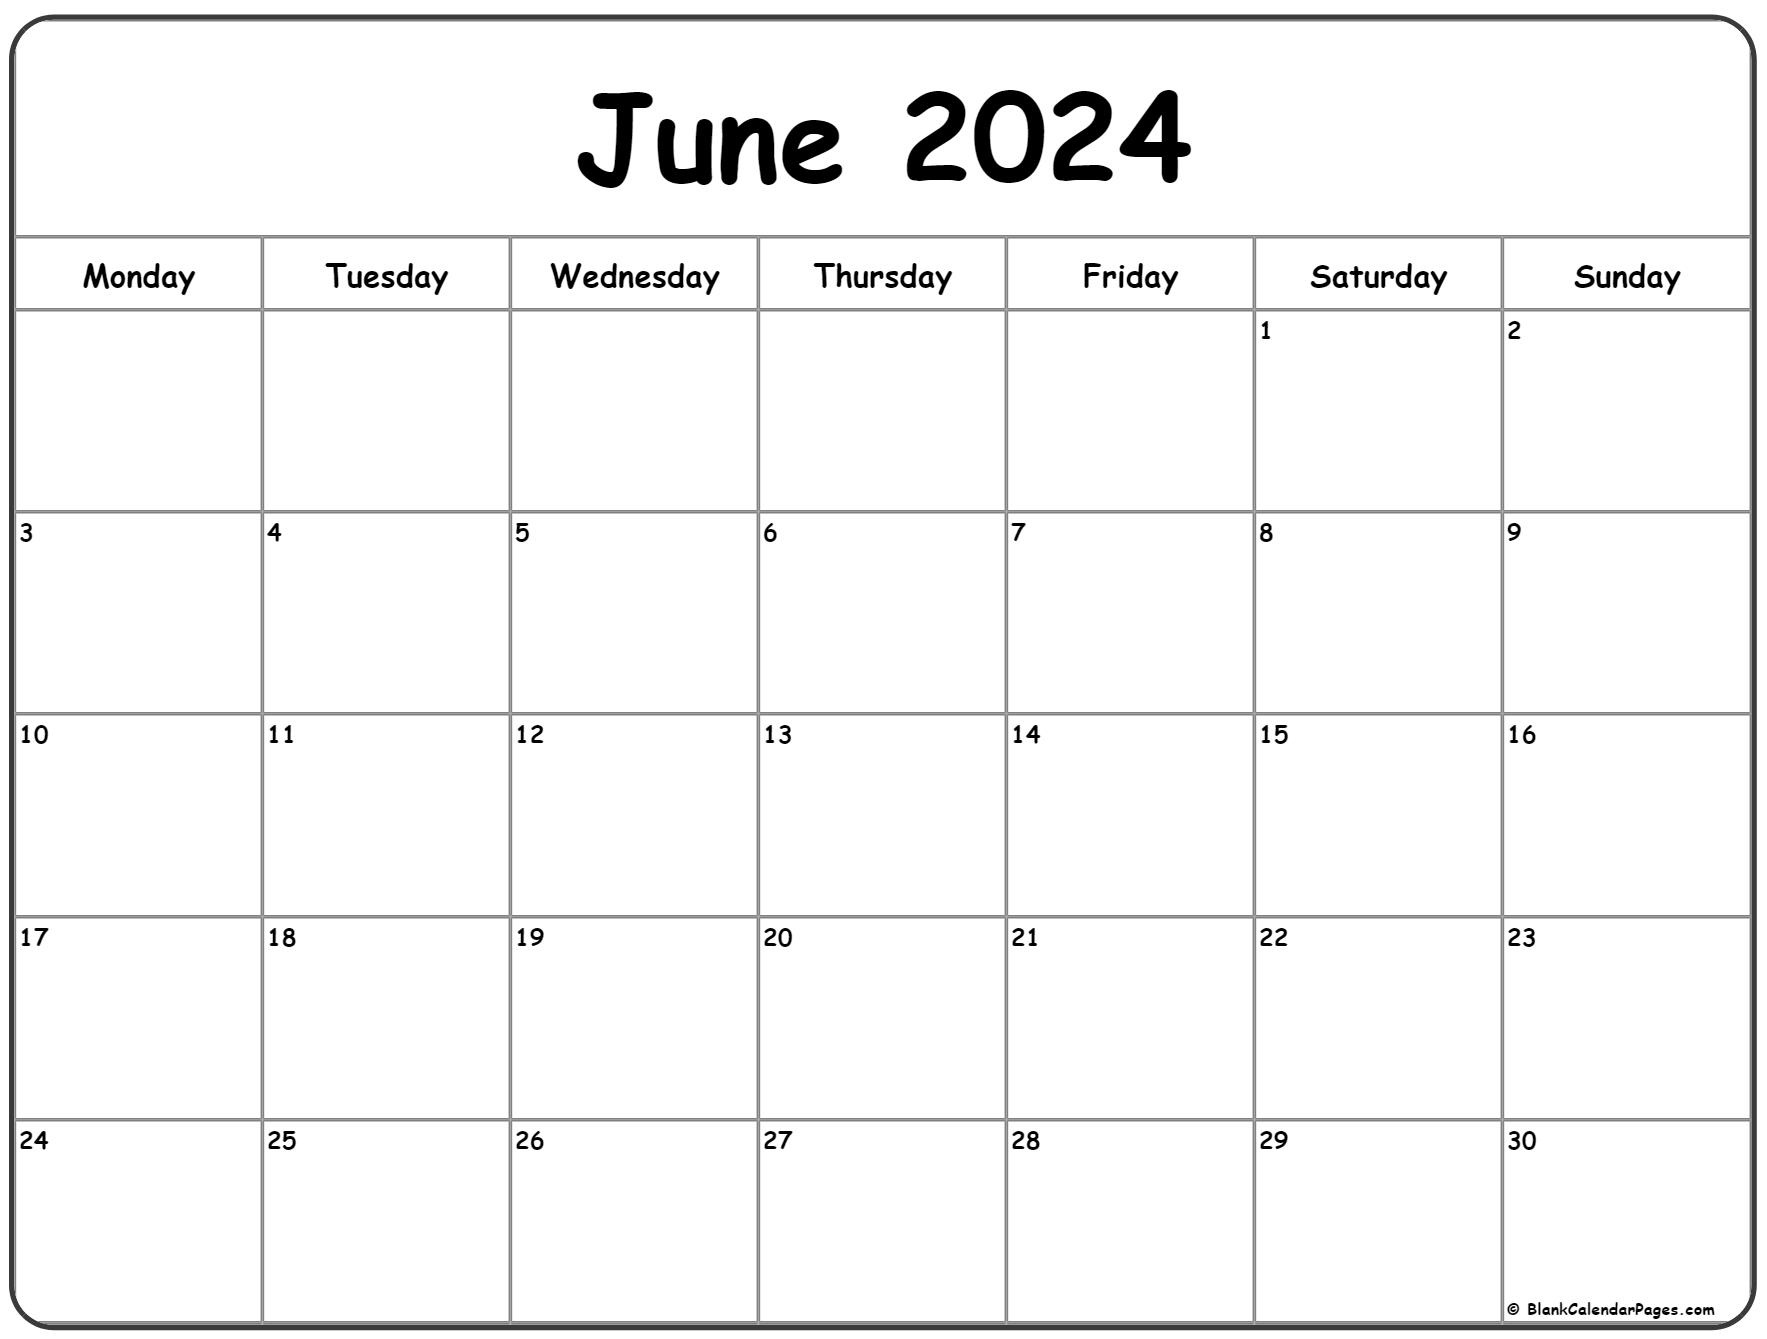 June 2024 Monday Calendar | Monday To Sunday within Picture Of June 2024 Calendar